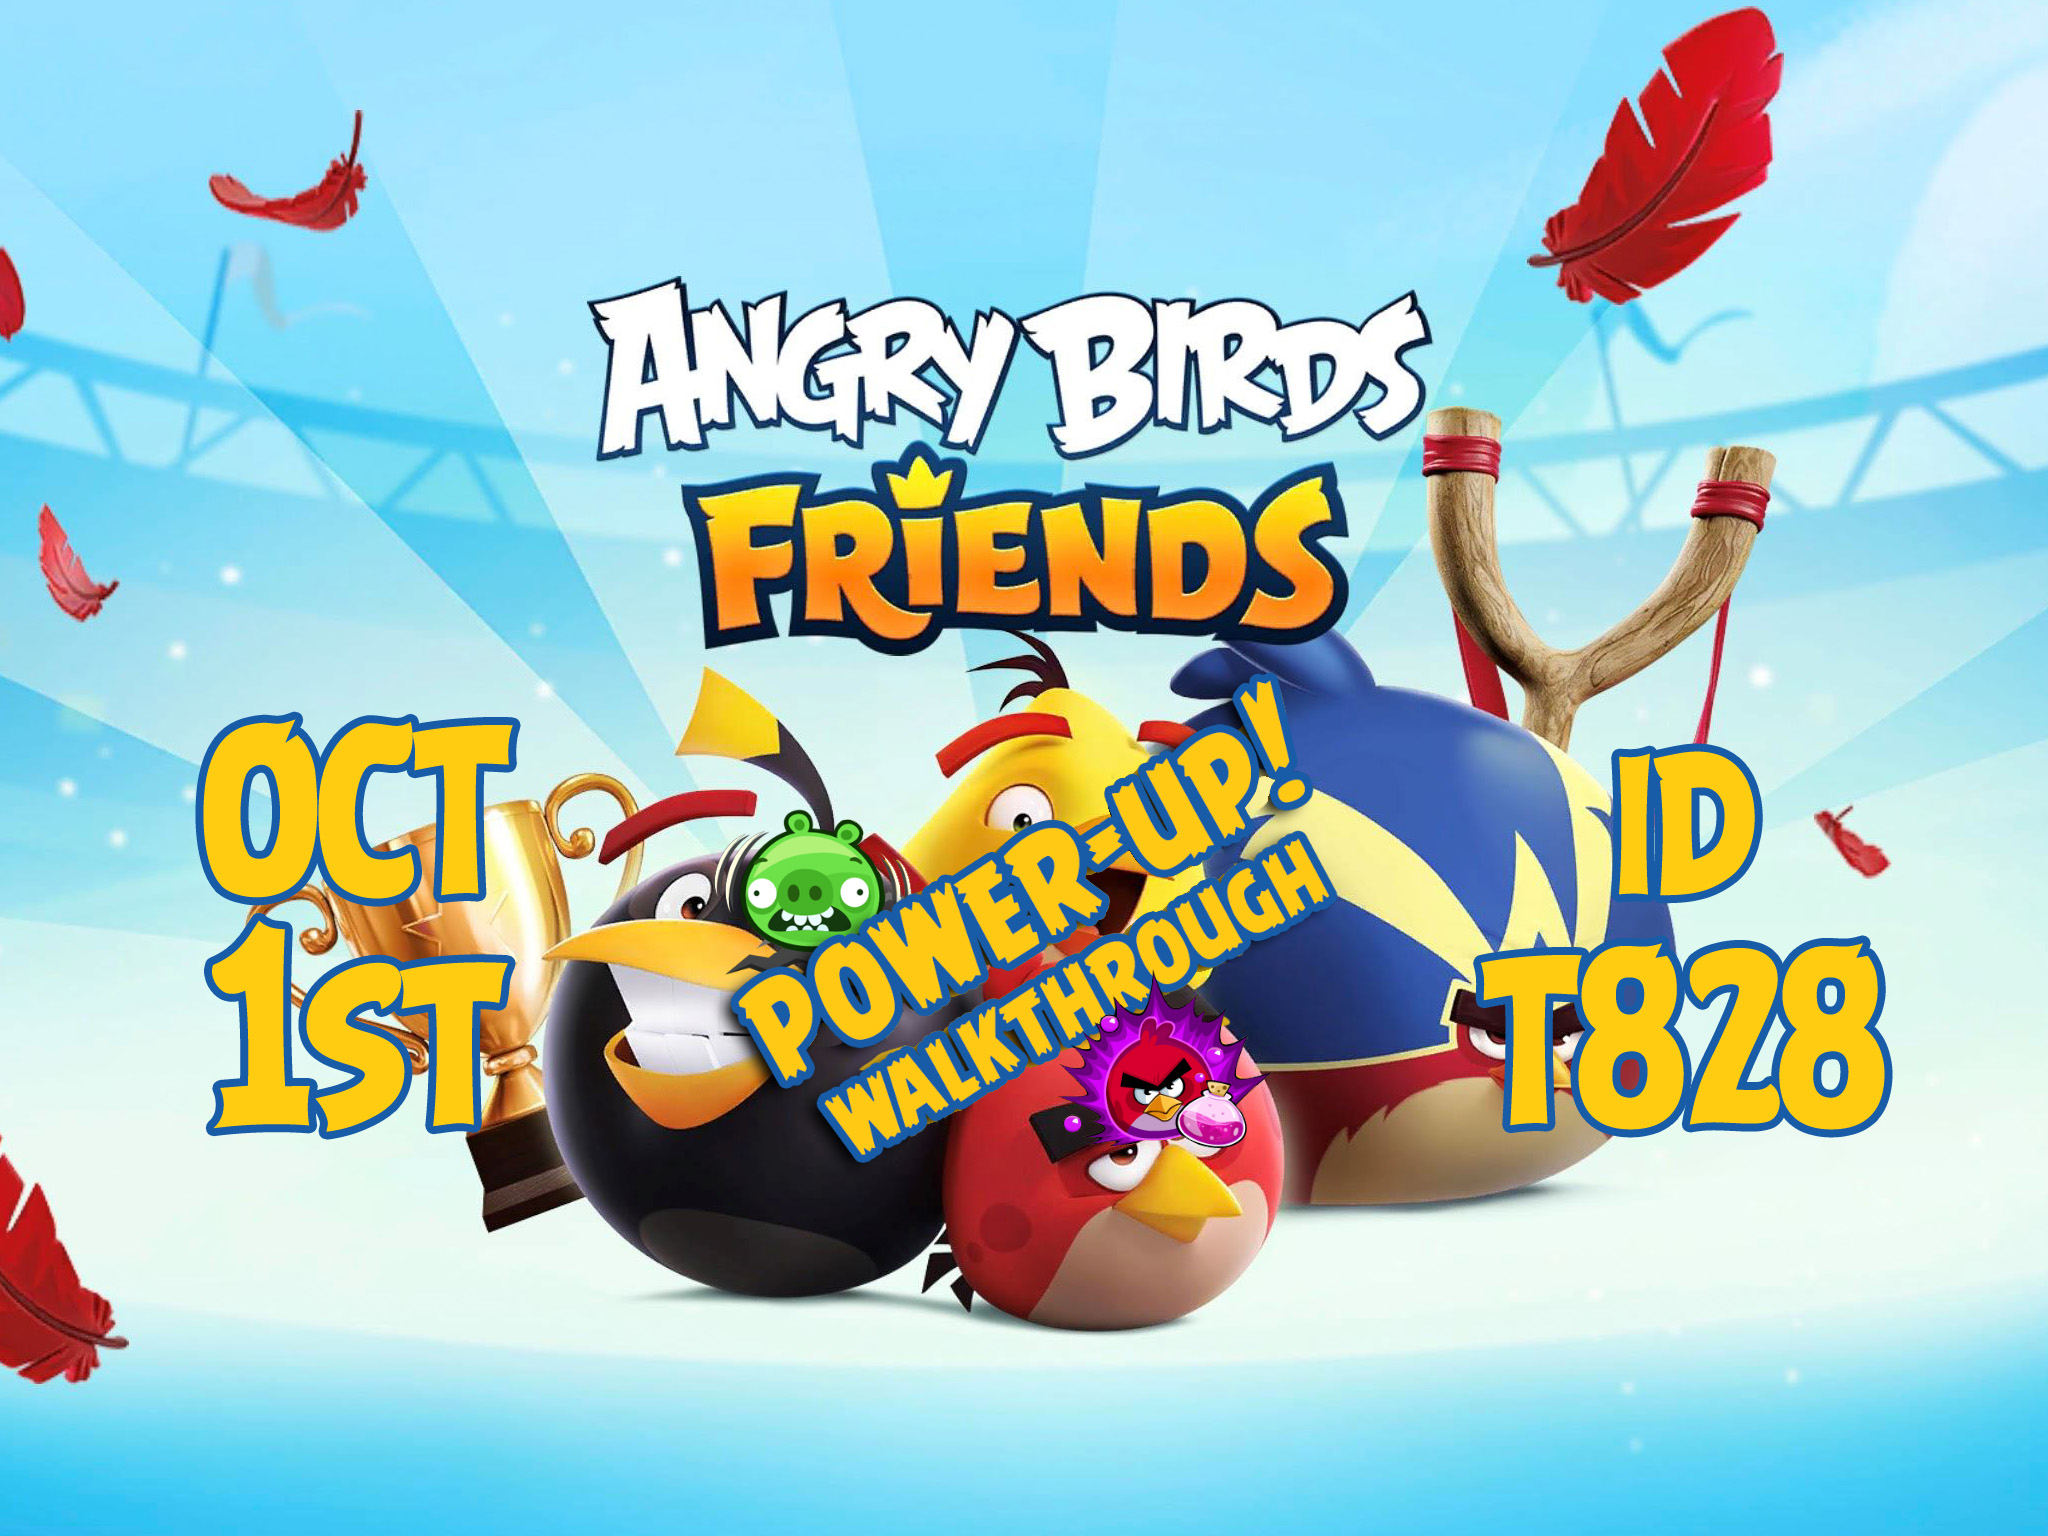 Angry-Birds-Friends-Tournament-T828-Feature-Image-PU